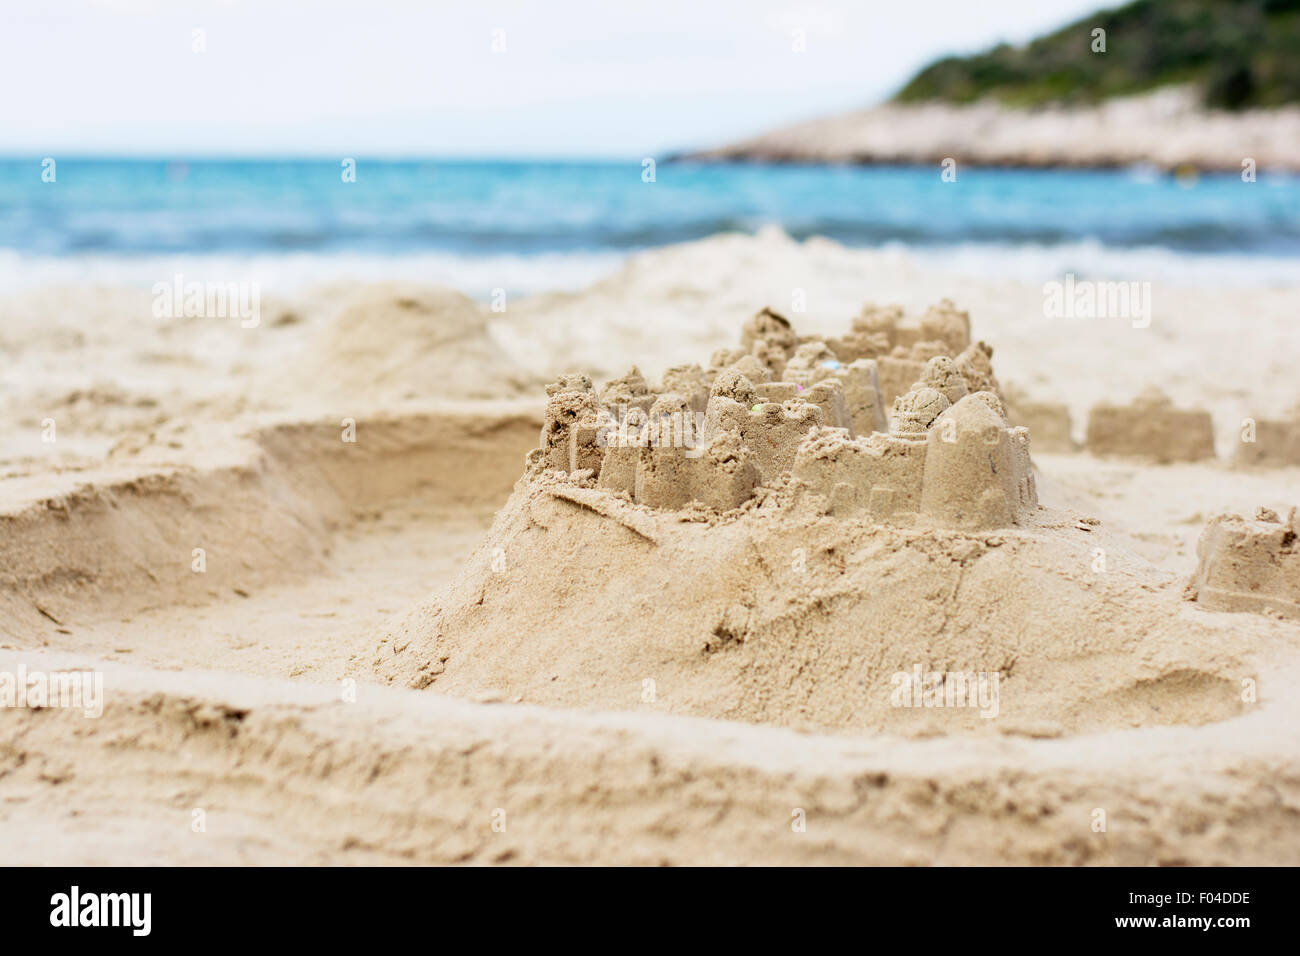 Children's sand castle on the beach with turquoise sea in background Stock Photo